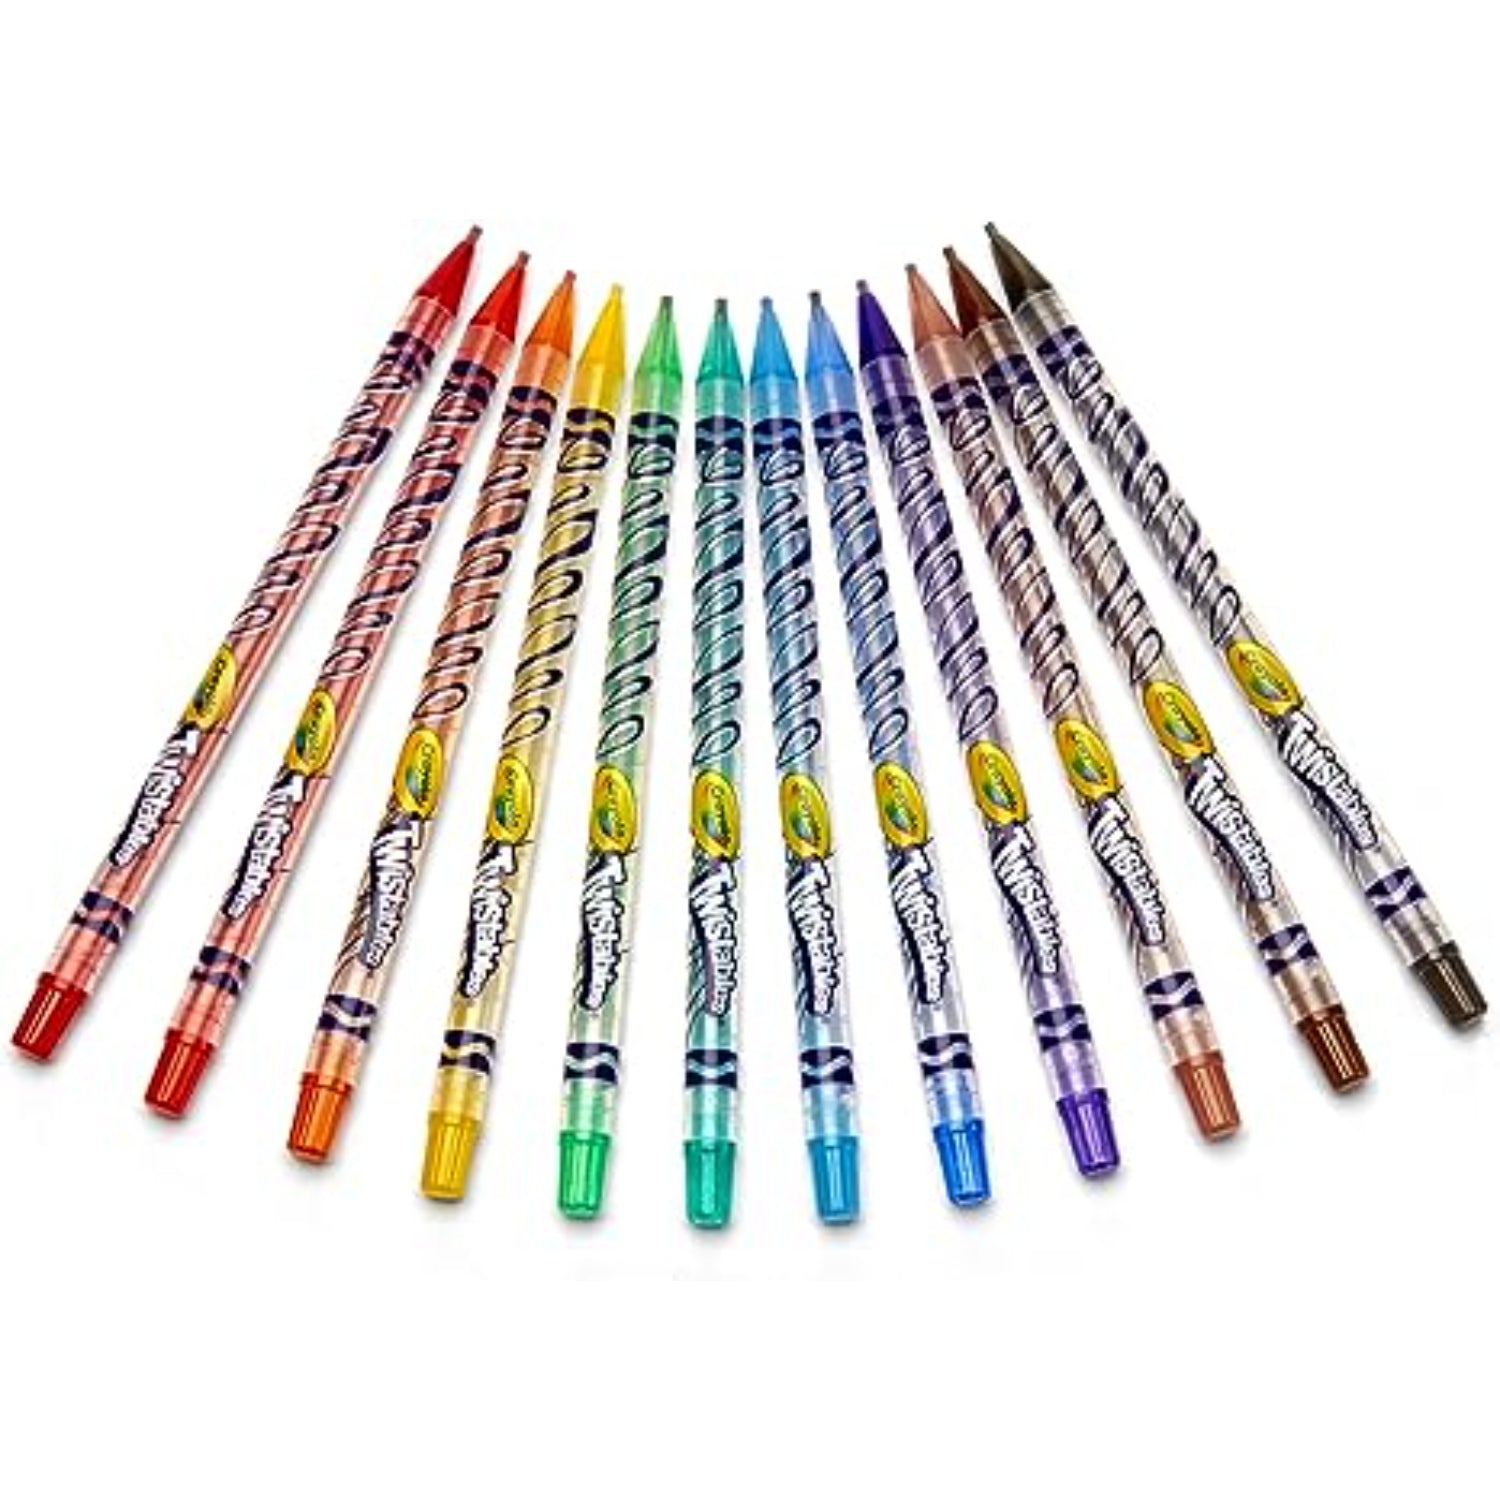 60 Pieces Rainbow Colored Pencils, 7 Color in 1 Pencils for Kids, Assorted Colors for Drawing Coloring Sketching Pencils for Drawing Stationery, Bulk